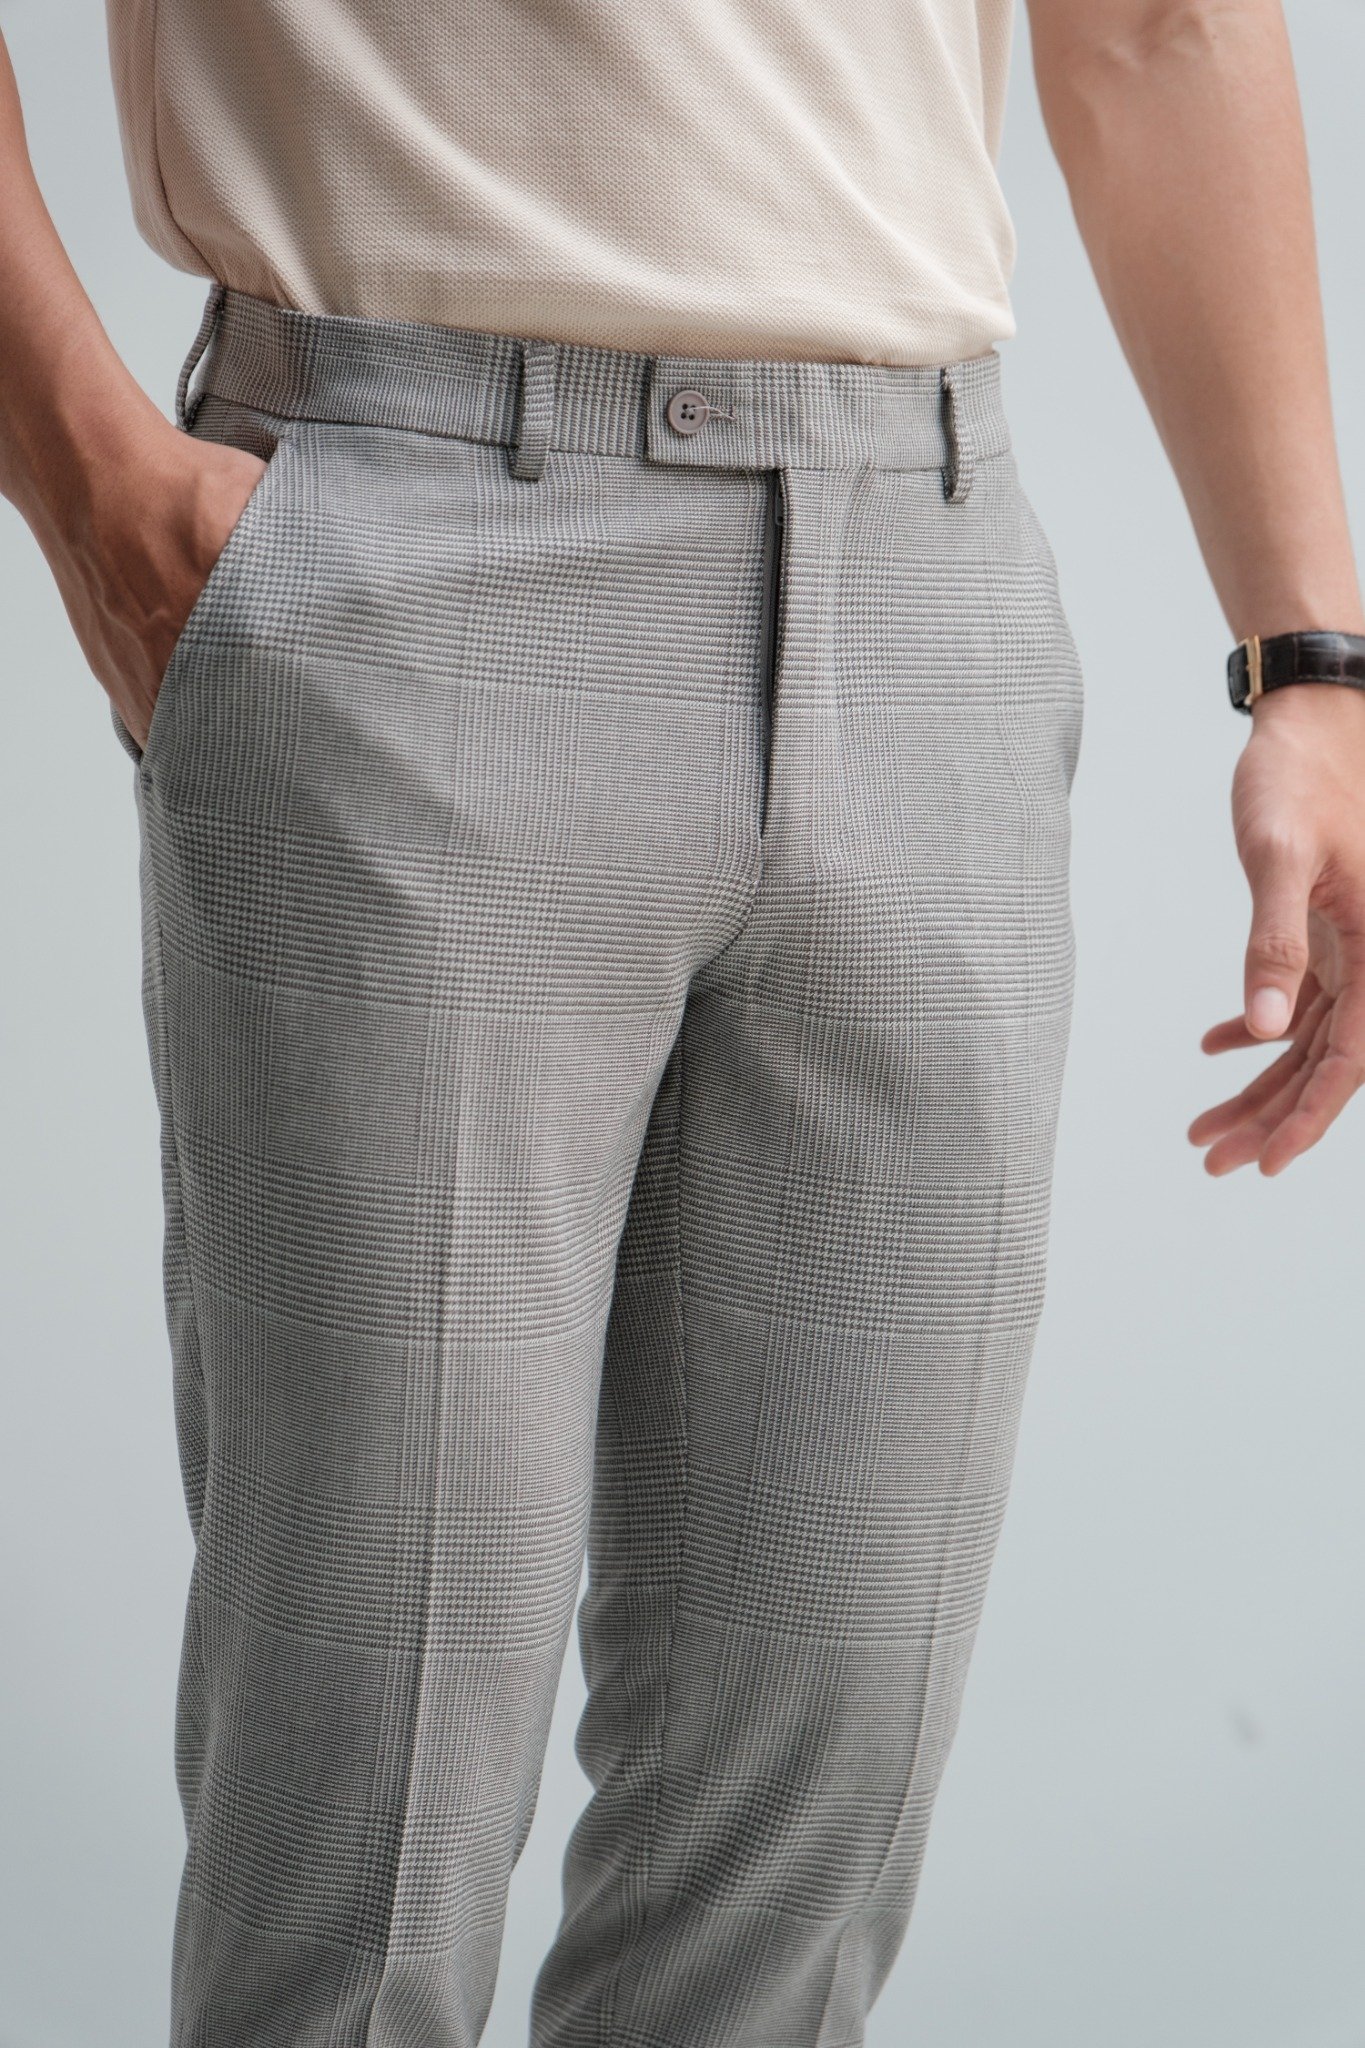 AG88 PREMIUM SLIMFIT “PRINCE OF WALE” CHECKED TROUSERS - GREY